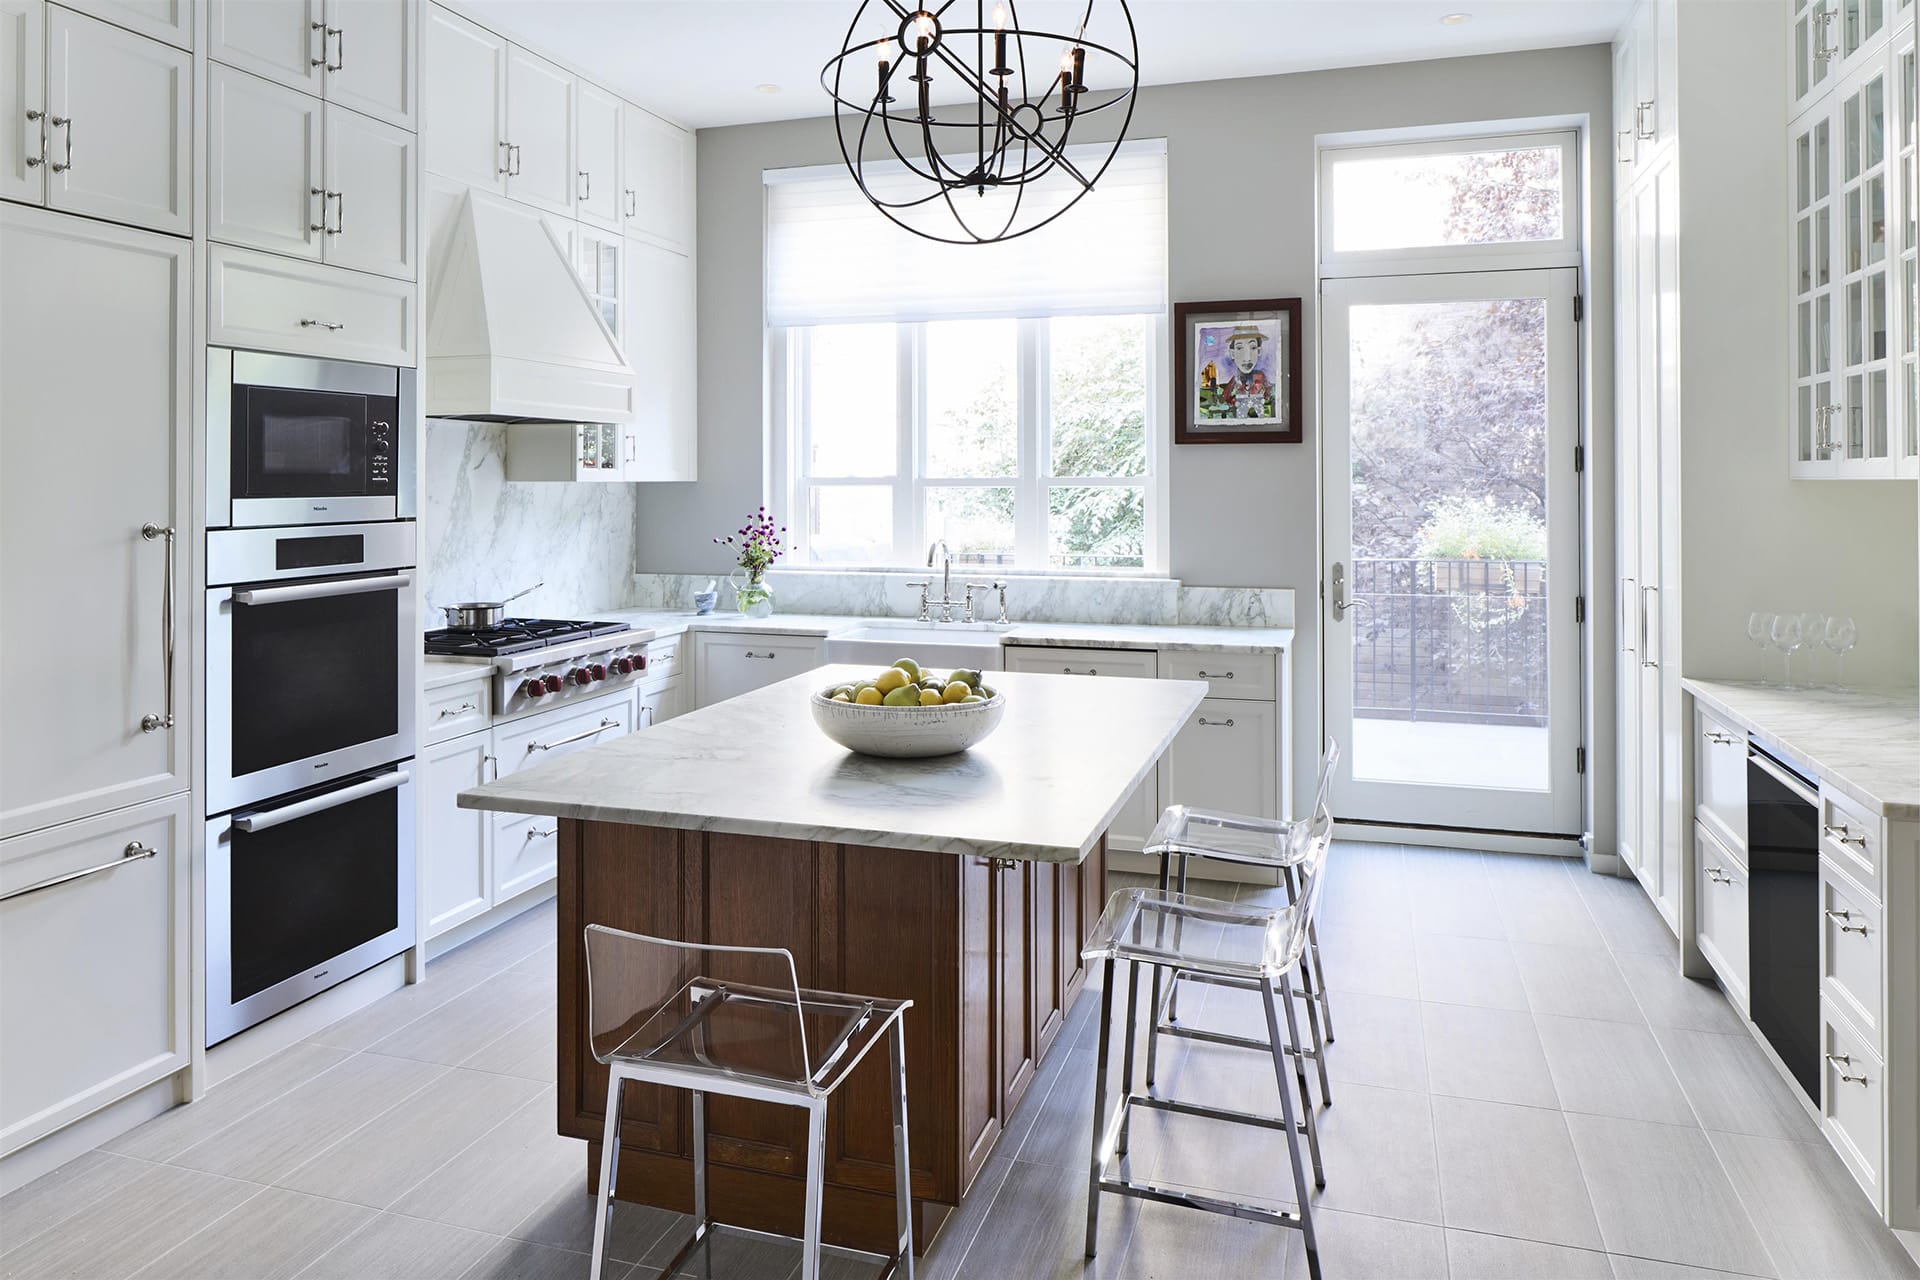 Parlor-level kitchen with white cabinetry, a double oven, wood an white marble island, and clear bar stools